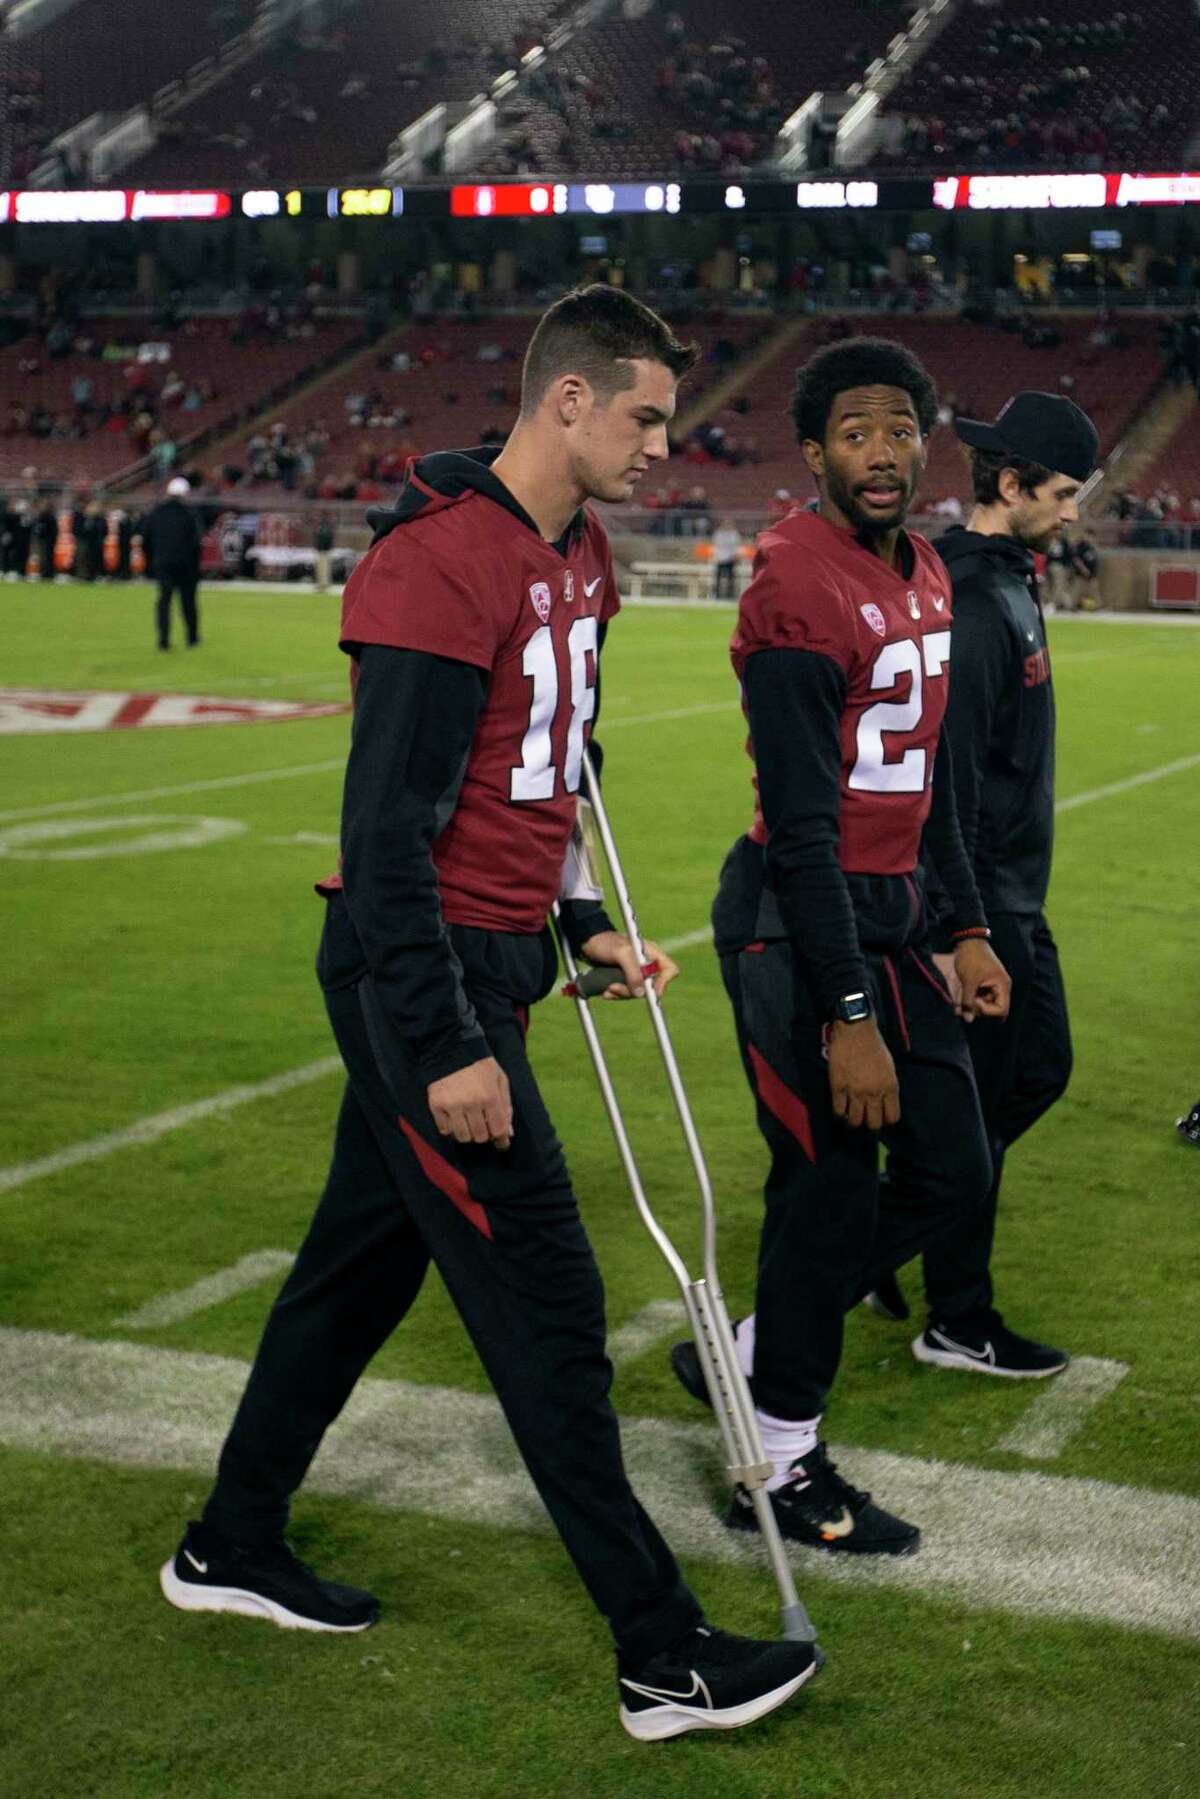 Stanford quarterback Tanner McKee (18) walks with the aid of a crutch before the team's NCAA college football game against Utah, Friday, Nov. 5, 2021, in Stanford, Calif. (AP Photo/D. Ross Cameron)